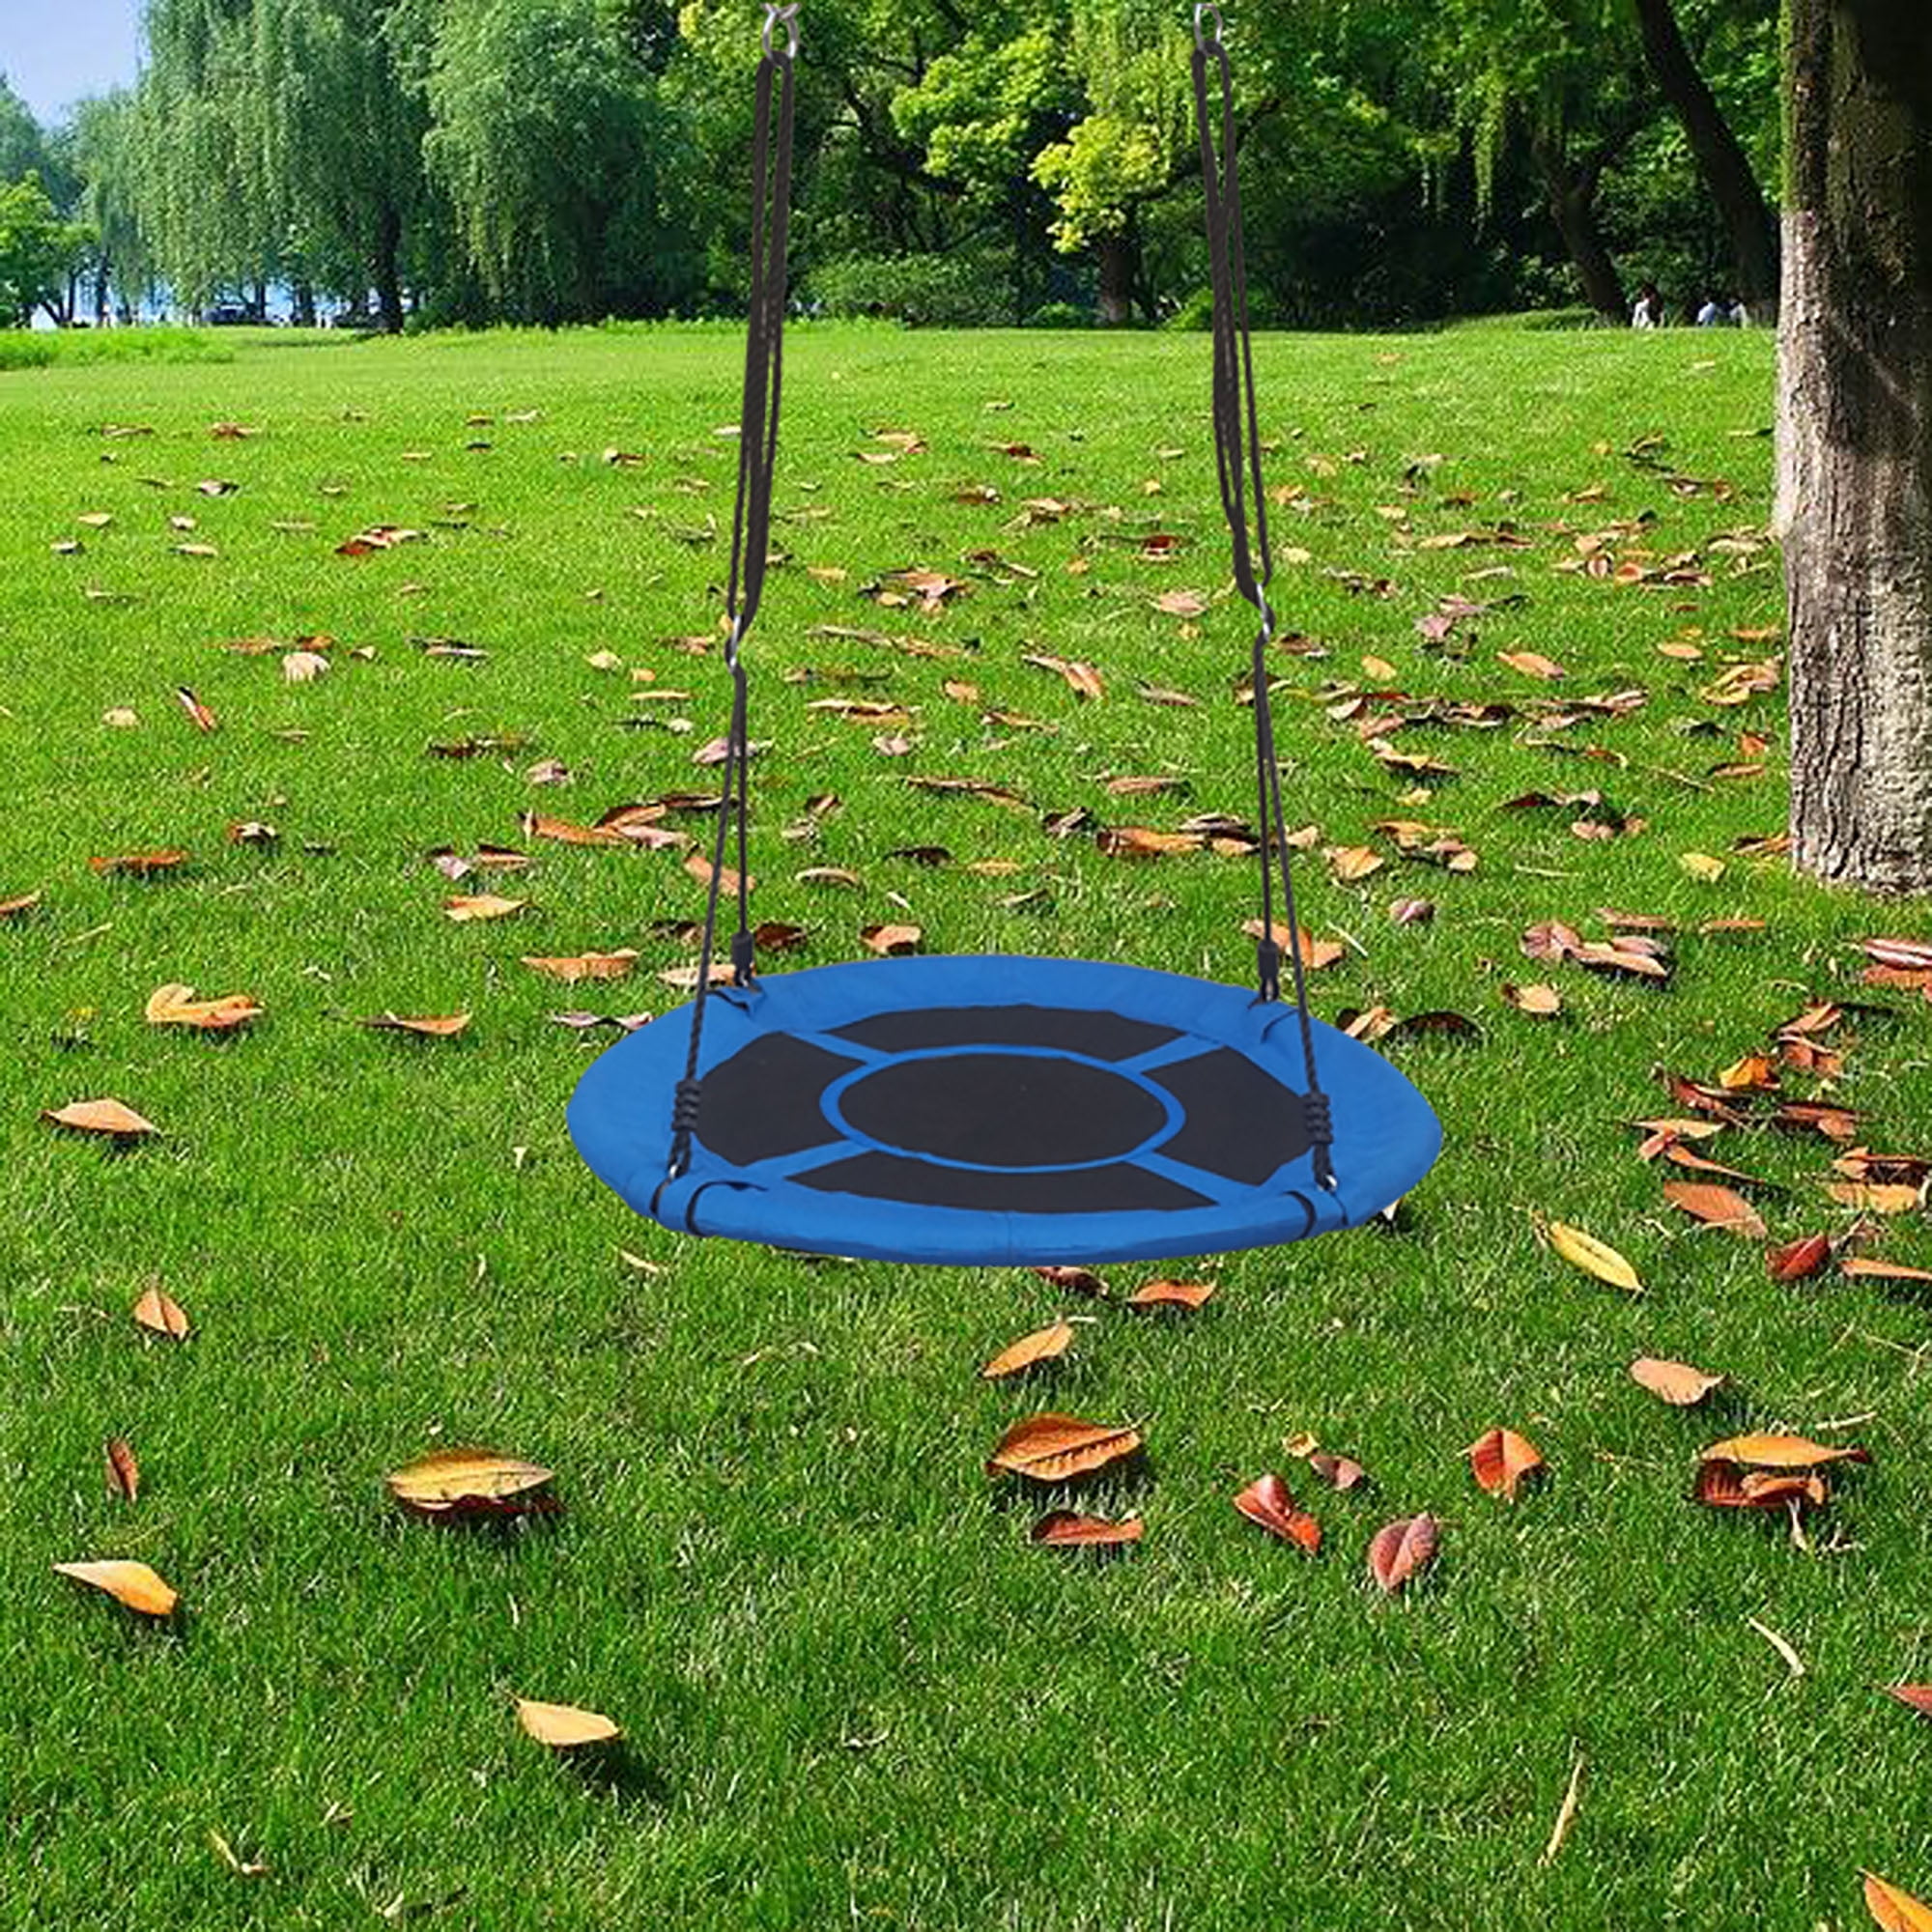 Details about   40'' Outdoor Tree Swing Chair Kids Round Hanging Rope Saucer Seat Yard Toys Blue 